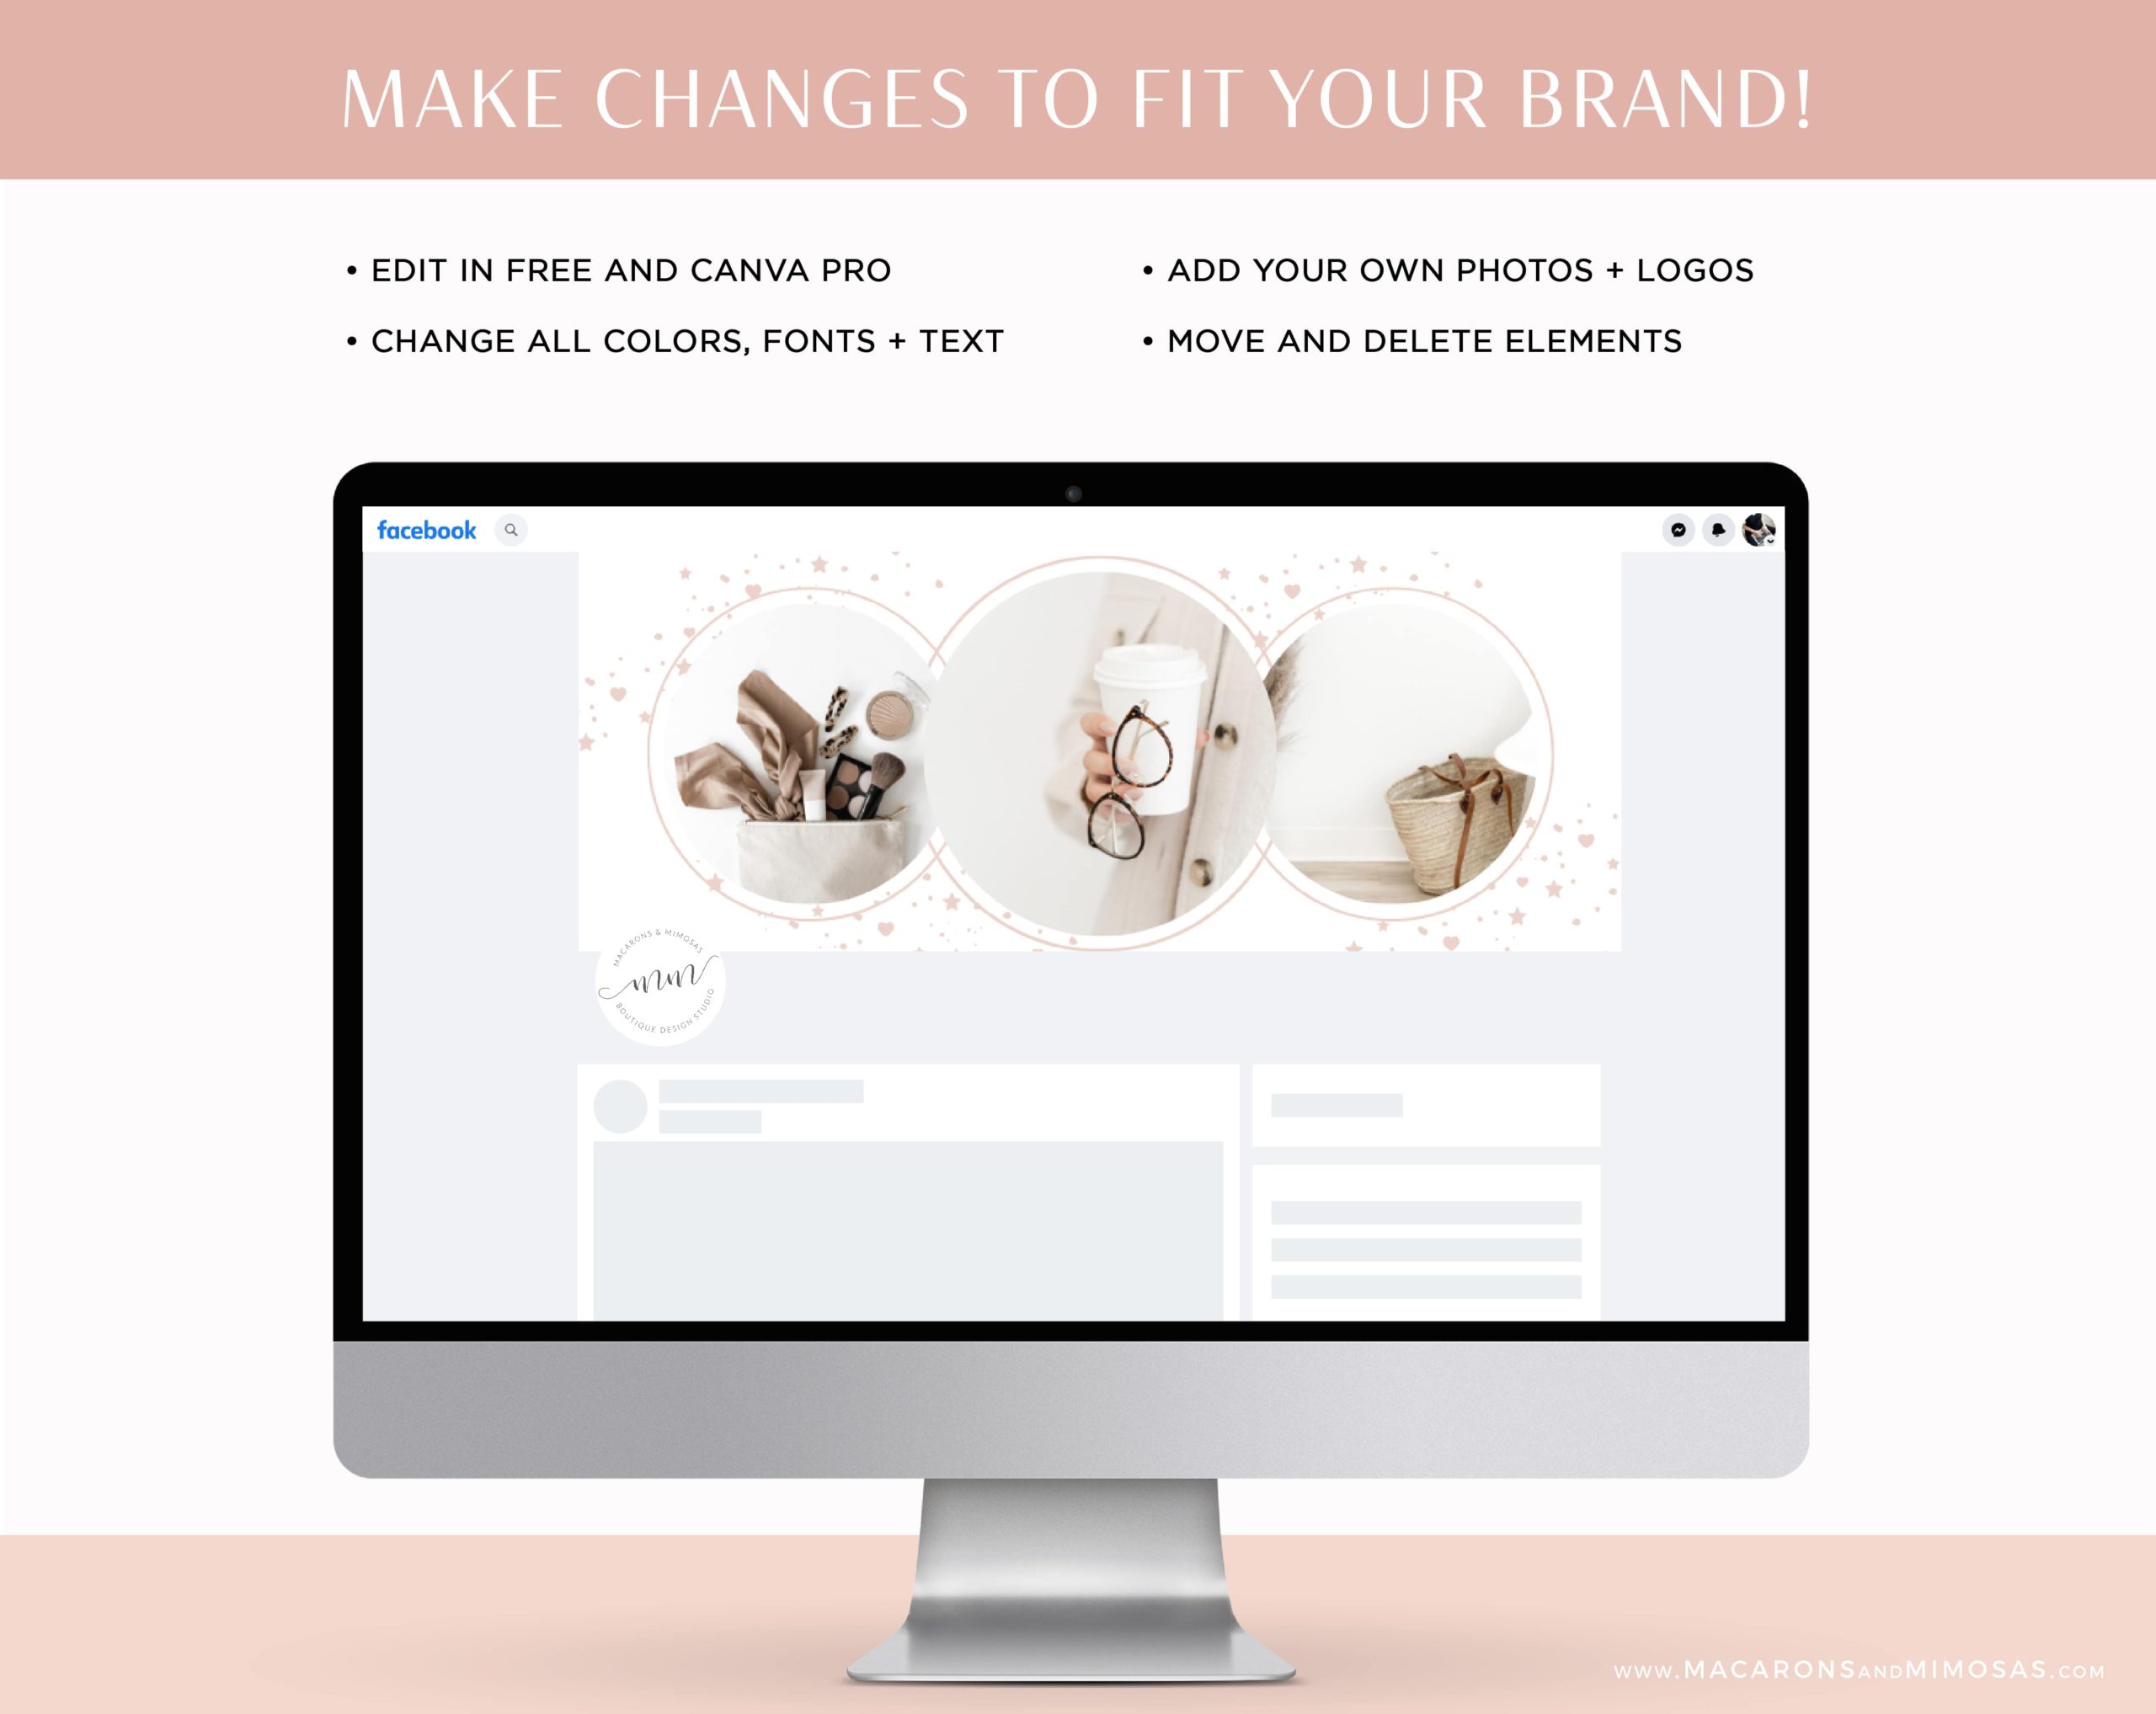 Star & Heart Facebook Cover Template in chic feminine pink and rose gold. Editable in Canva, DIY Social Media Templates for Canva edit to fit your brand!